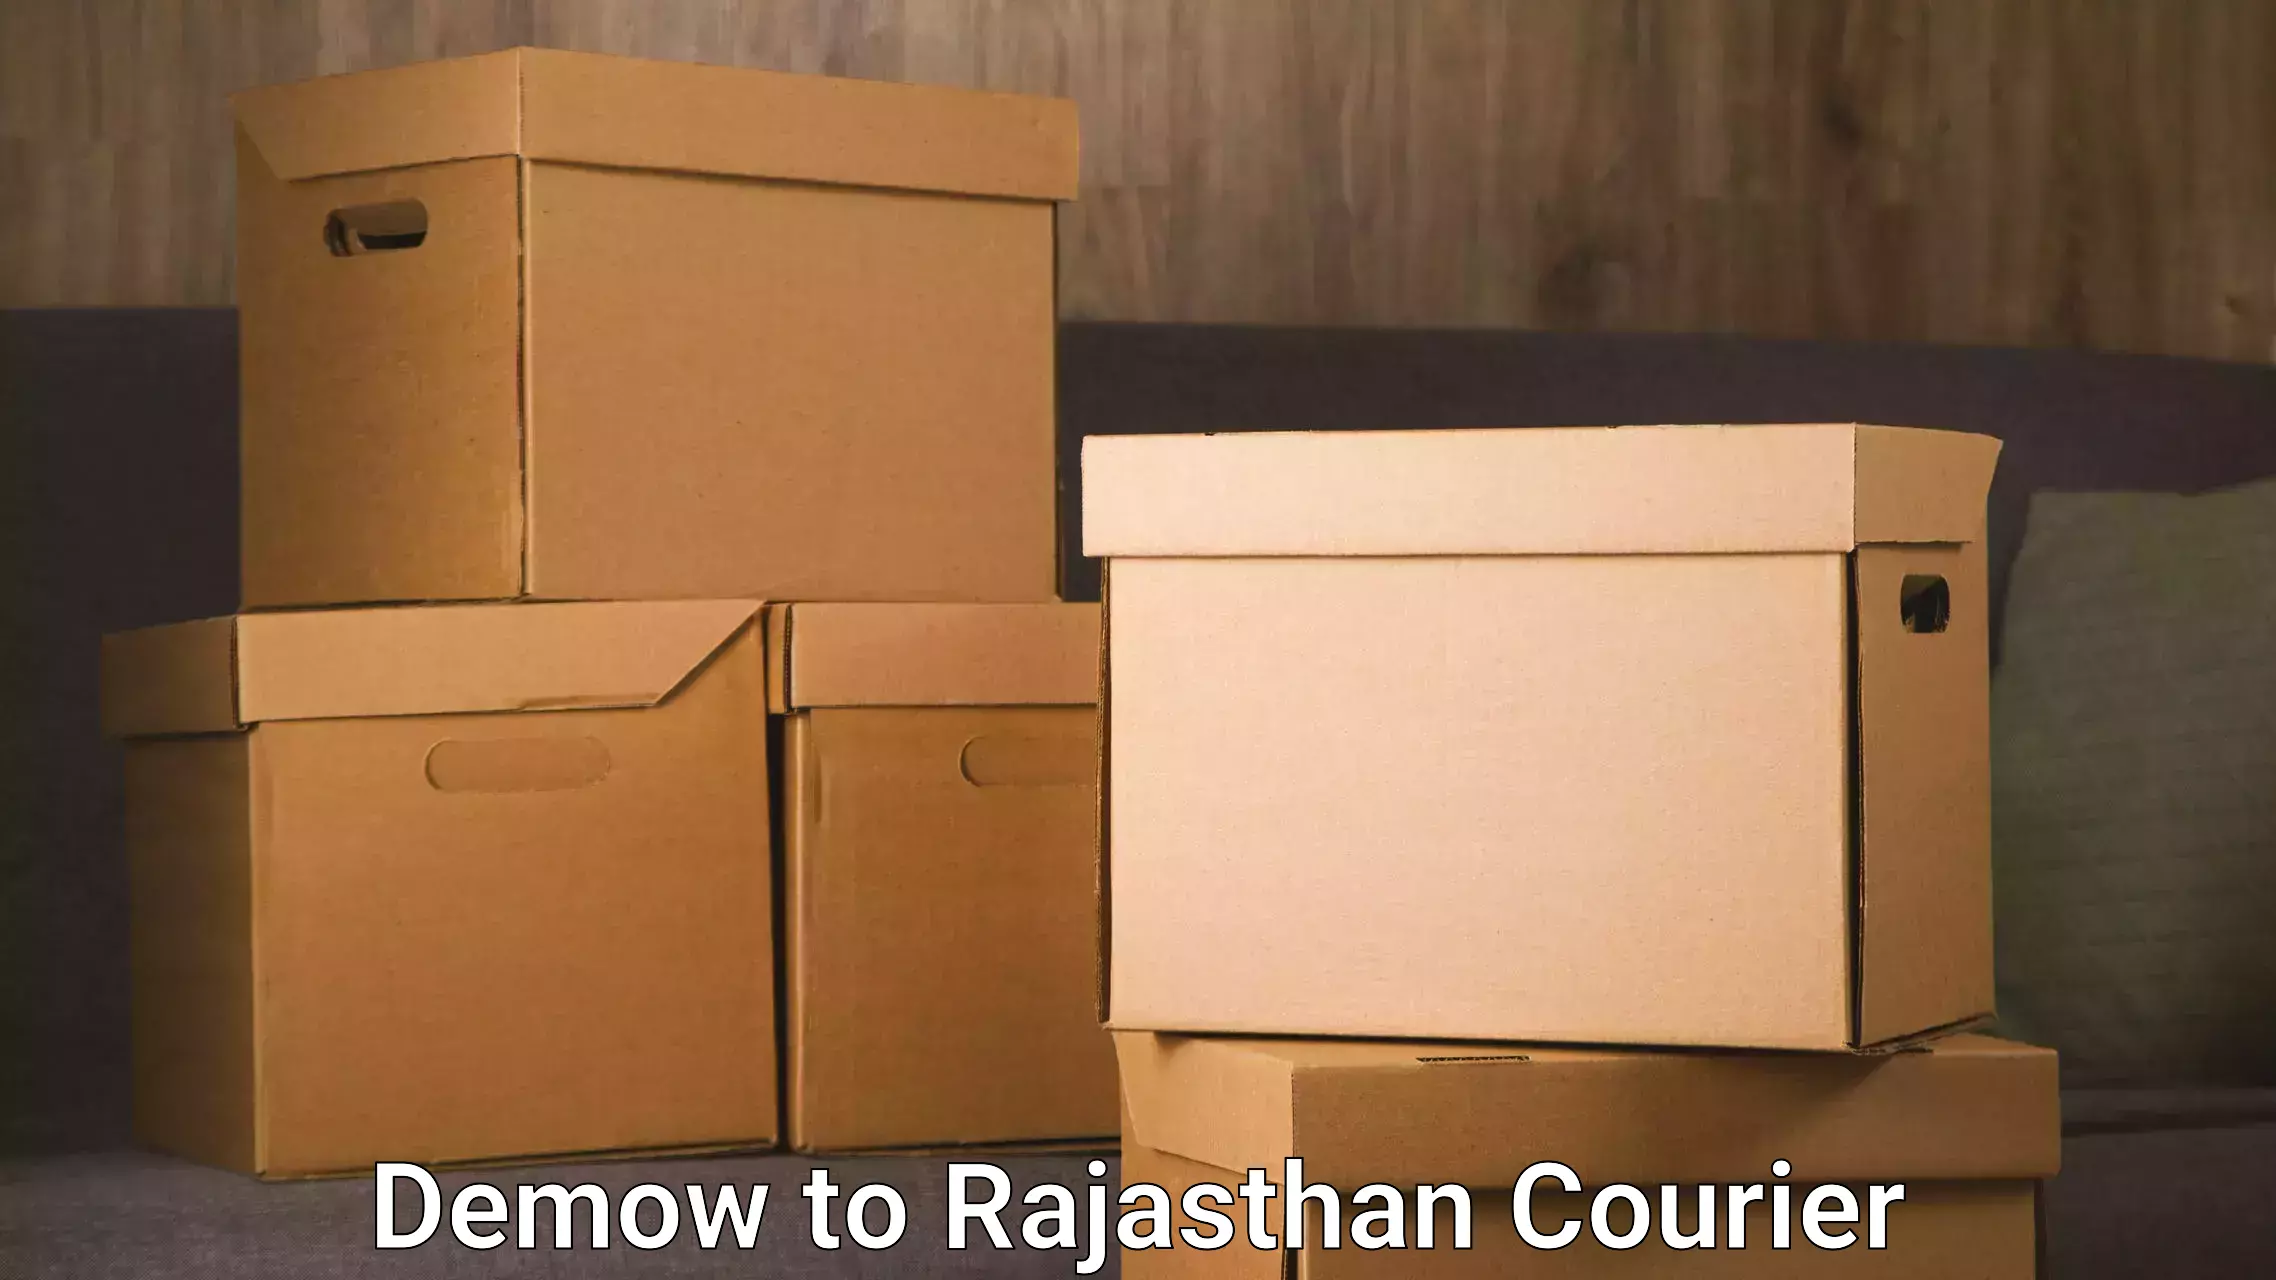 Round-the-clock parcel delivery in Demow to Suratgarh